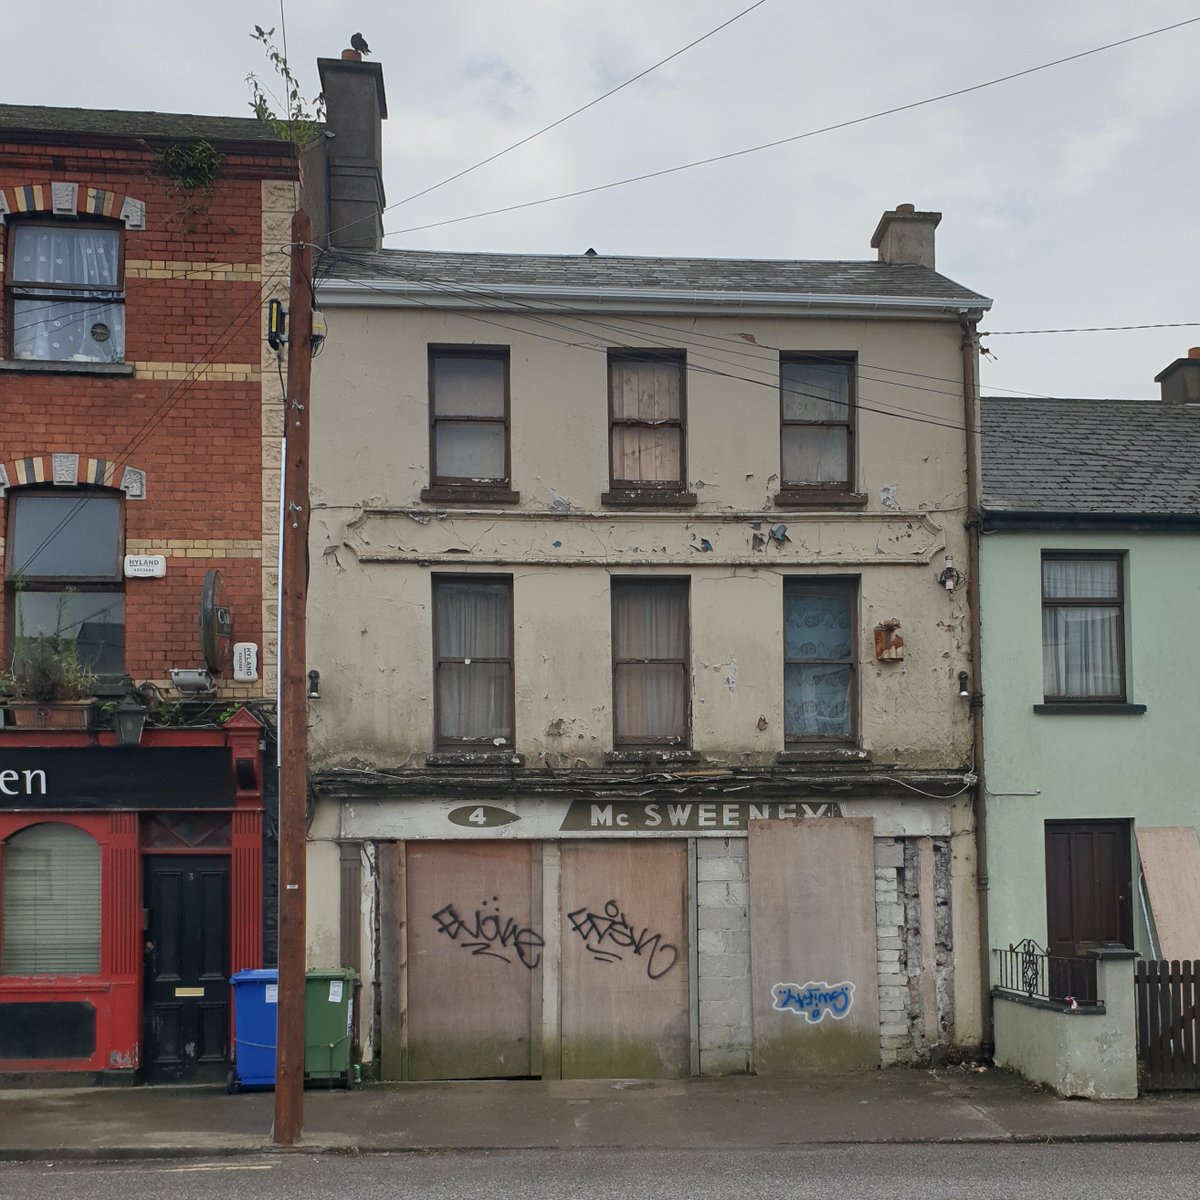 another character empty property Cork city, this one a former pub has so many nice featuresshould be someones home, work, community spaceso sad to see so many derelict, vacant, crumbling properties across Ireland #not1home  #HeritageWeek  #homeless  #respect  #pfg  #meanwhileuse